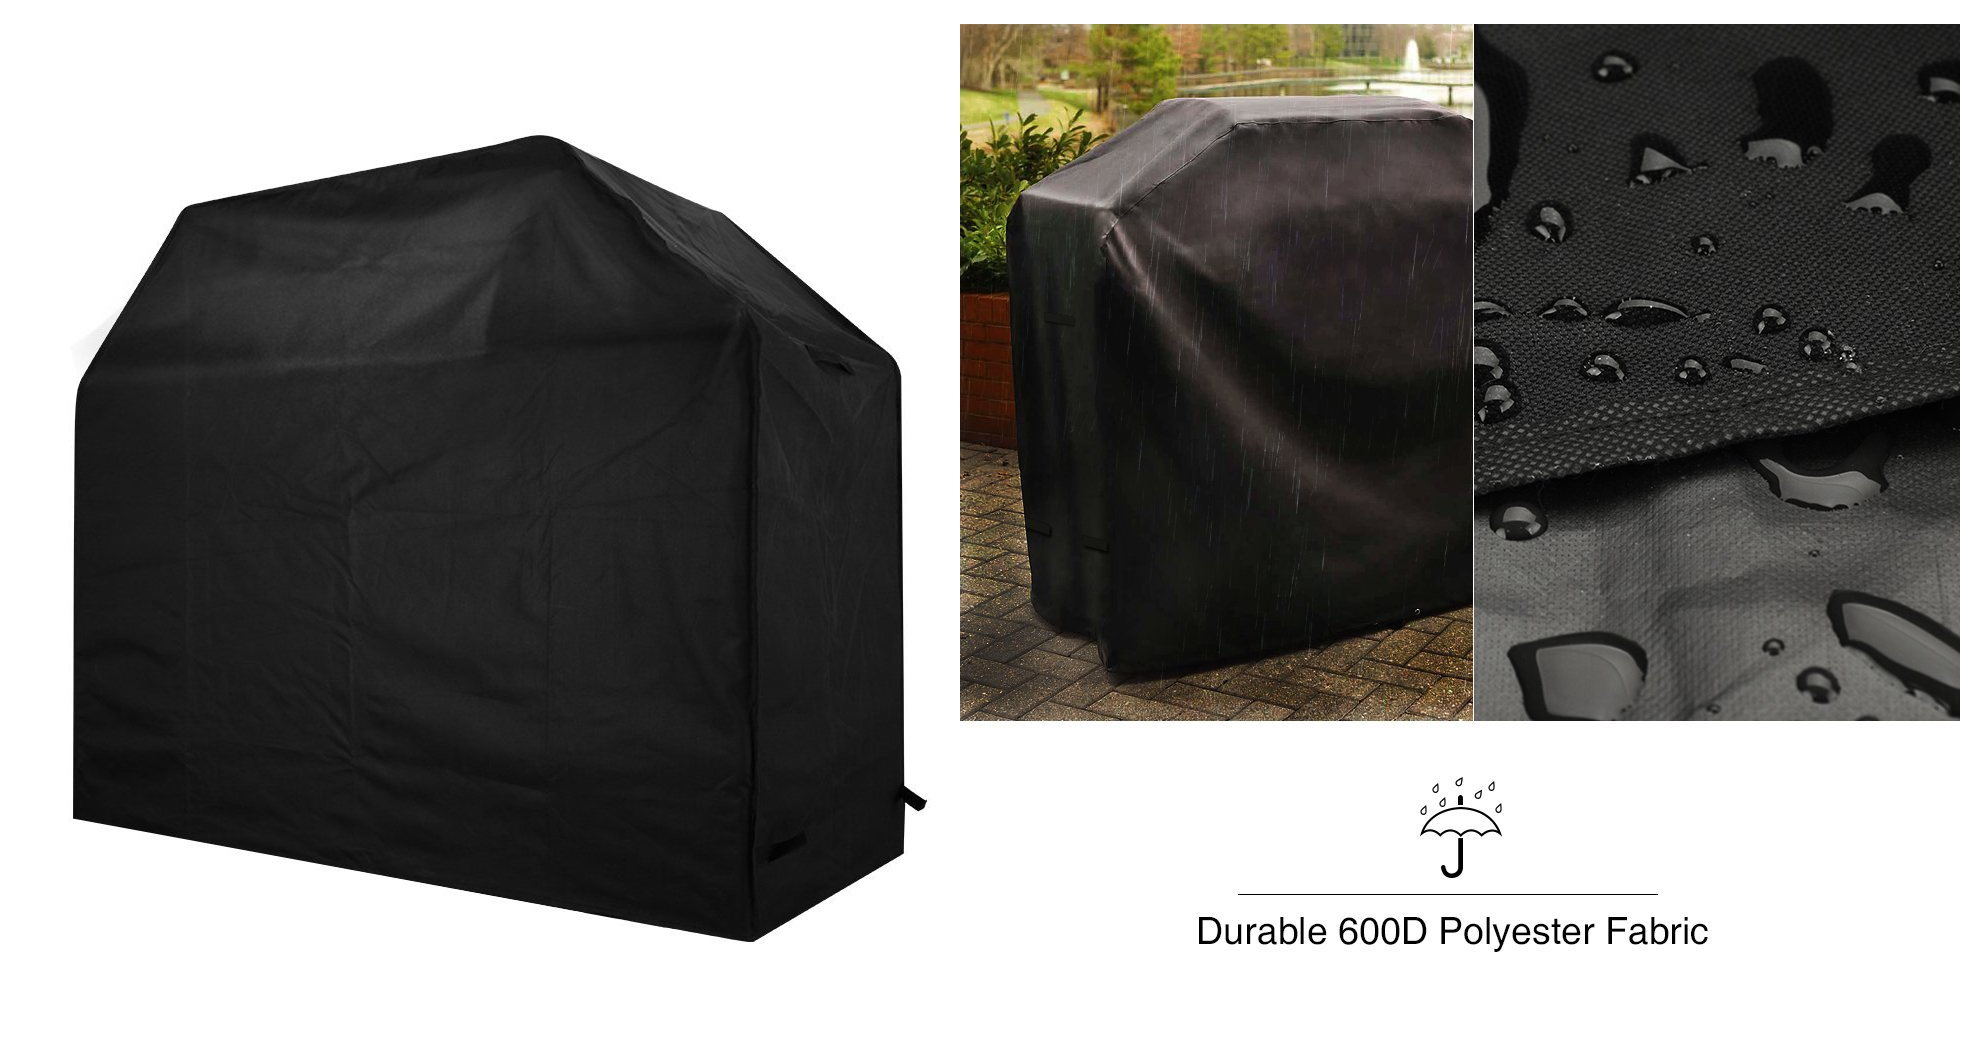 Waterproof Heavy Duty Grill Cover Only $12.99 on Amazon! (#1 Best Seller With Great Reviews!)